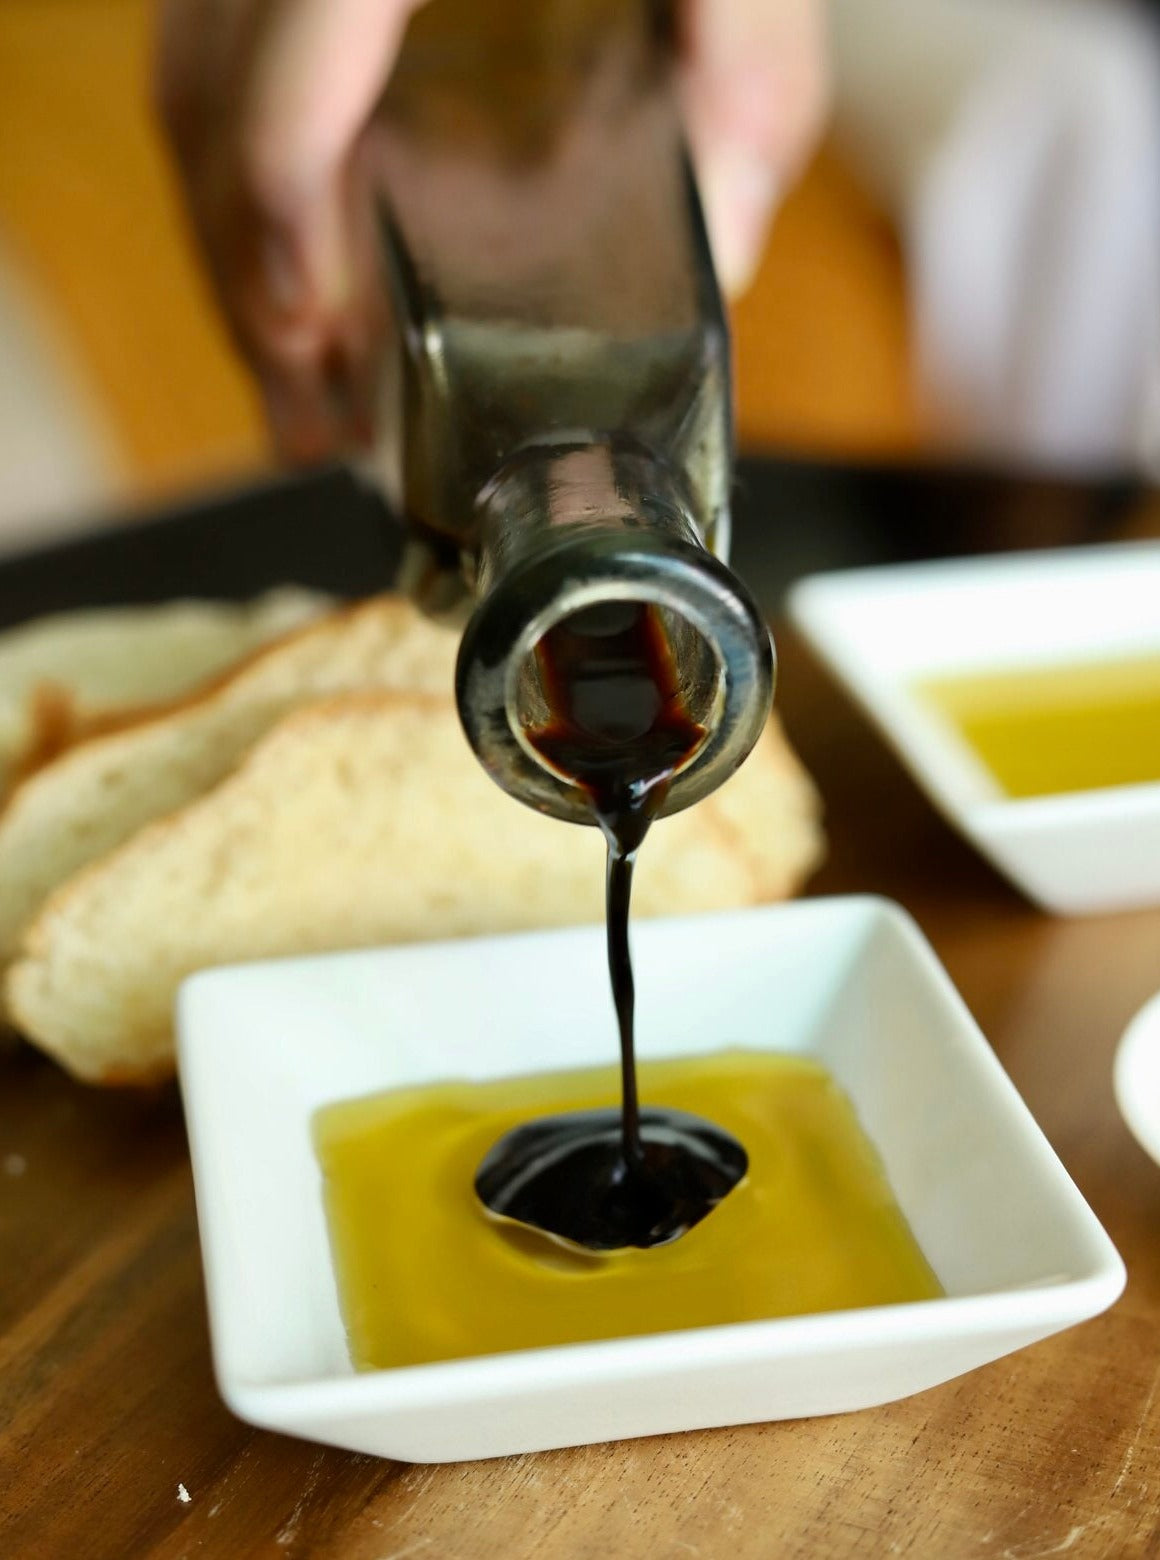 Olive Oil, Balsamic, Pesto and More!